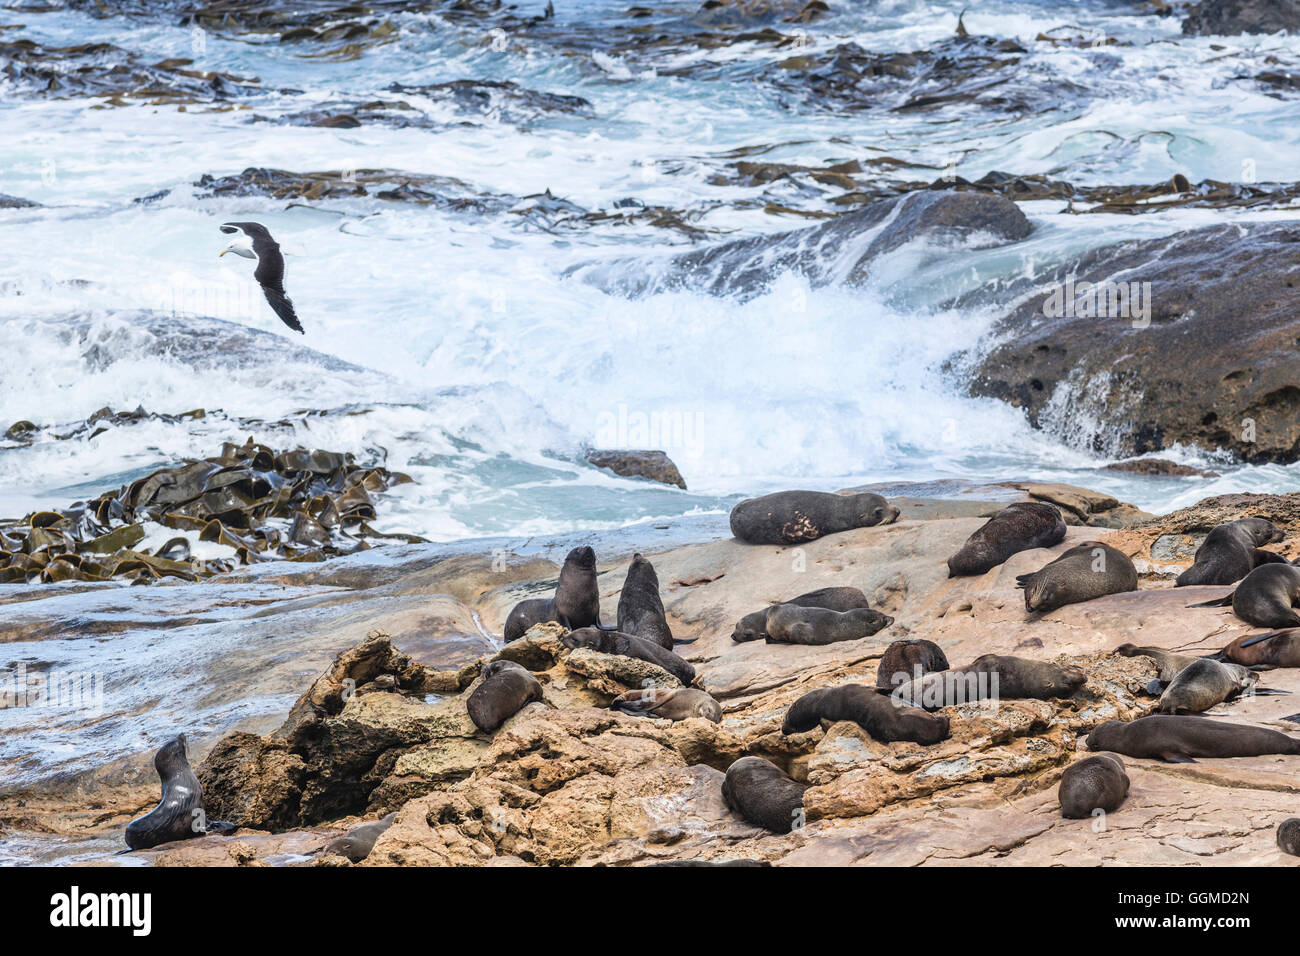 Great black-backed gull and fur seals at Shag Point, Palmerston, East coast of South Island, New Zealand Stock Photo